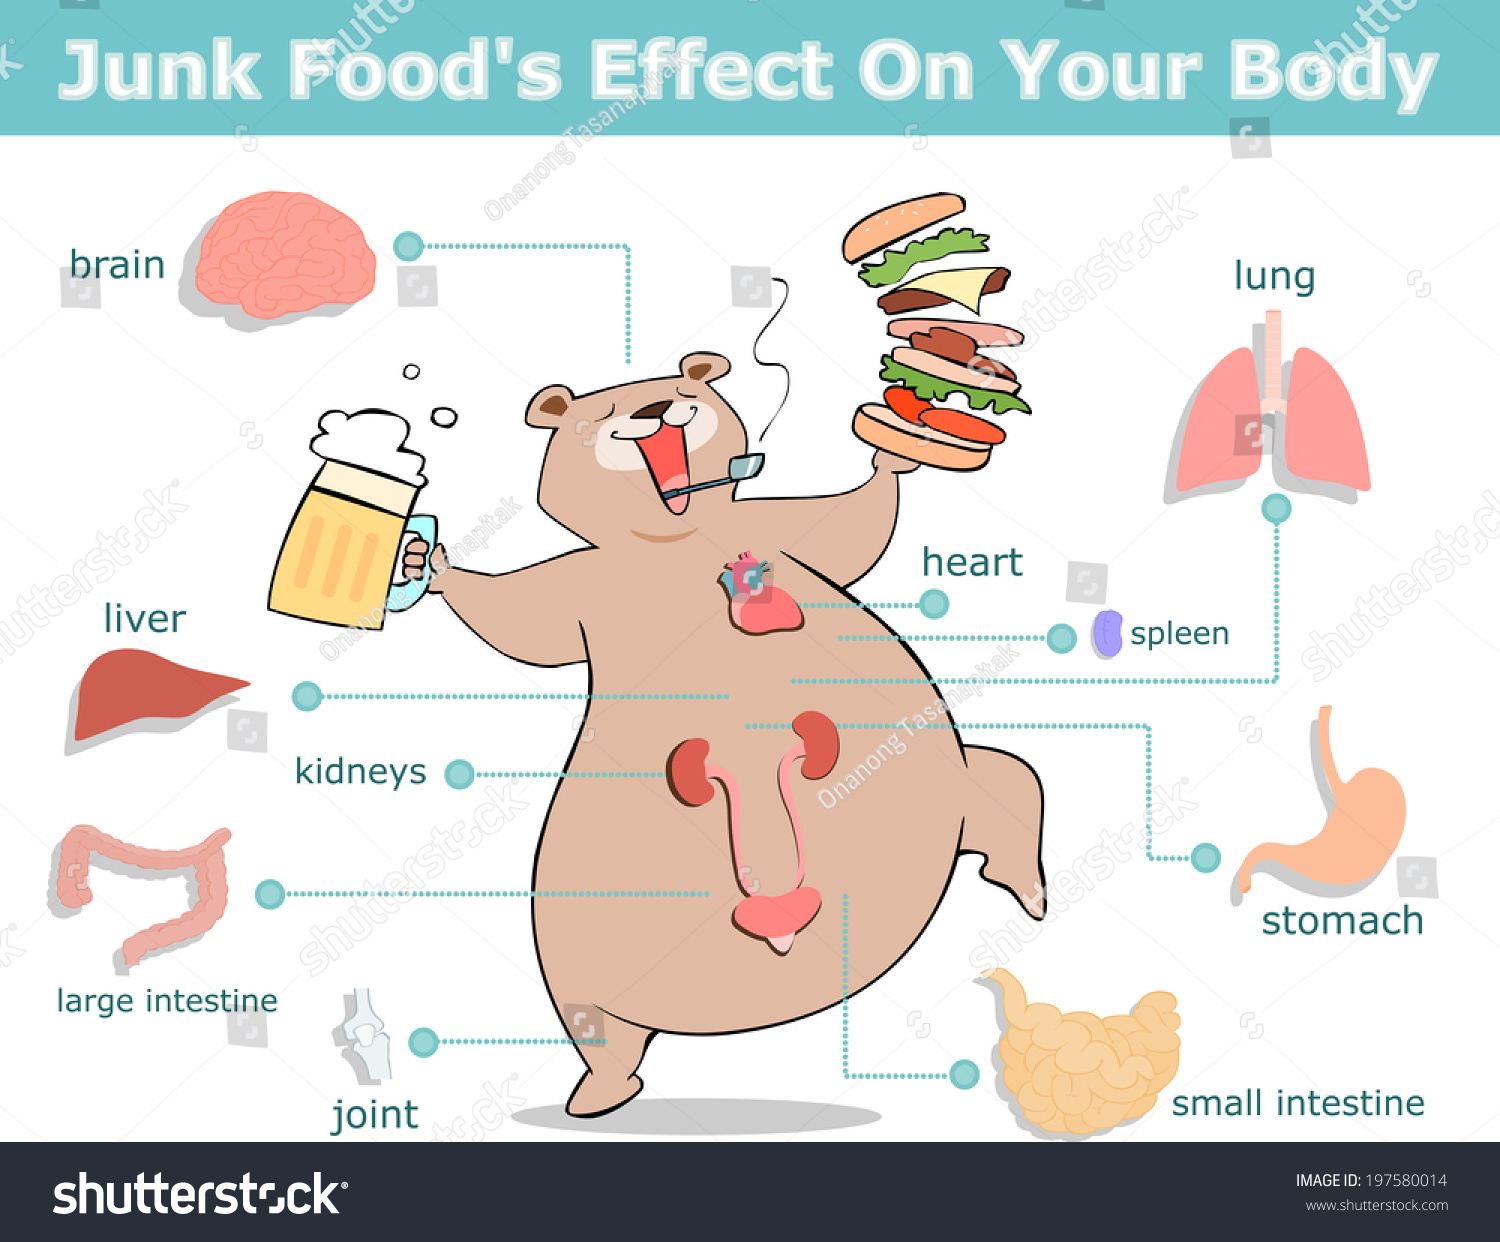 Fast Food Nutrition: Junk Food's Effect On Your Body